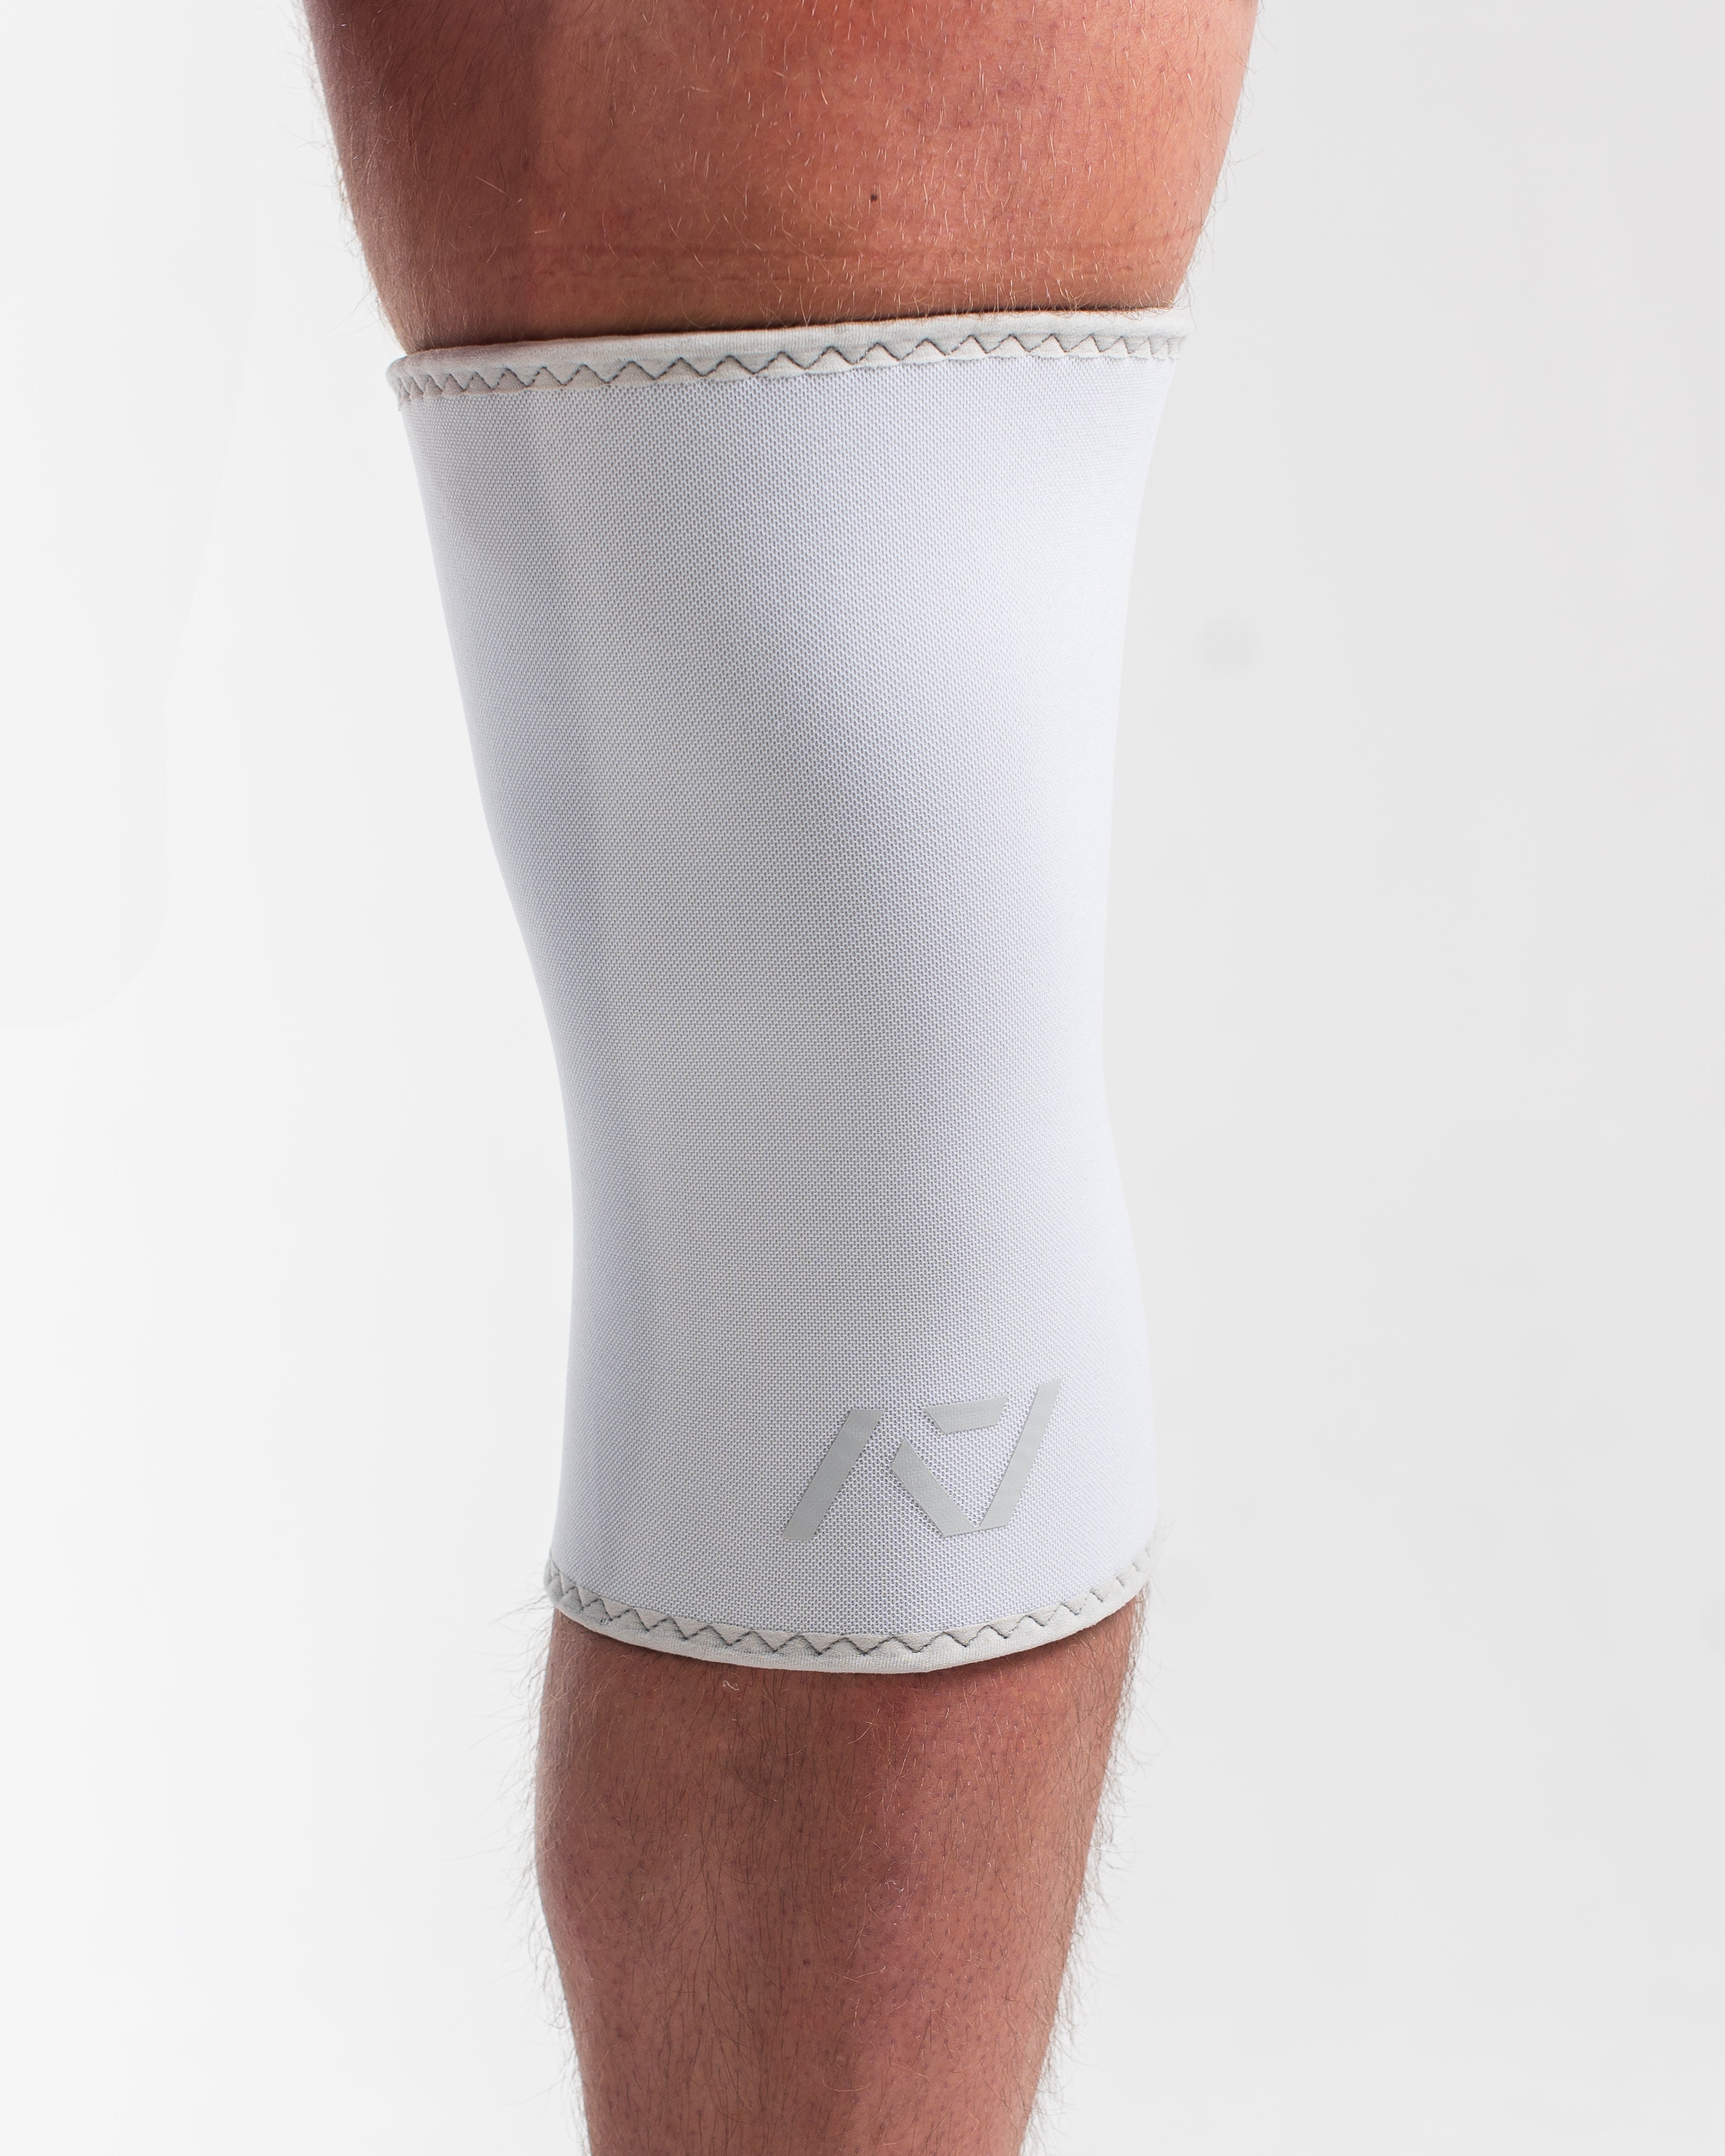 A7 IPF Approved Hourglass Knee Sleeves feature an hourglass-shaped centre taper fit to help provide knee compression while maintaining proper tightness around the calf and quad, offered in three stiffnesses (Flexi, Stiff and Rigor Mortis). Shop the full A7 Powerlifting IPF Approved Equipment collection. The IPF Approved Kit includes Powerlifting Singlet, A7 Meet Shirt, A7 Zebra Wrist Wraps and A7 Deadlift Socks. All A7 Powerlifting Equipment shipping to UK, Norway, Switzerland and Iceland.